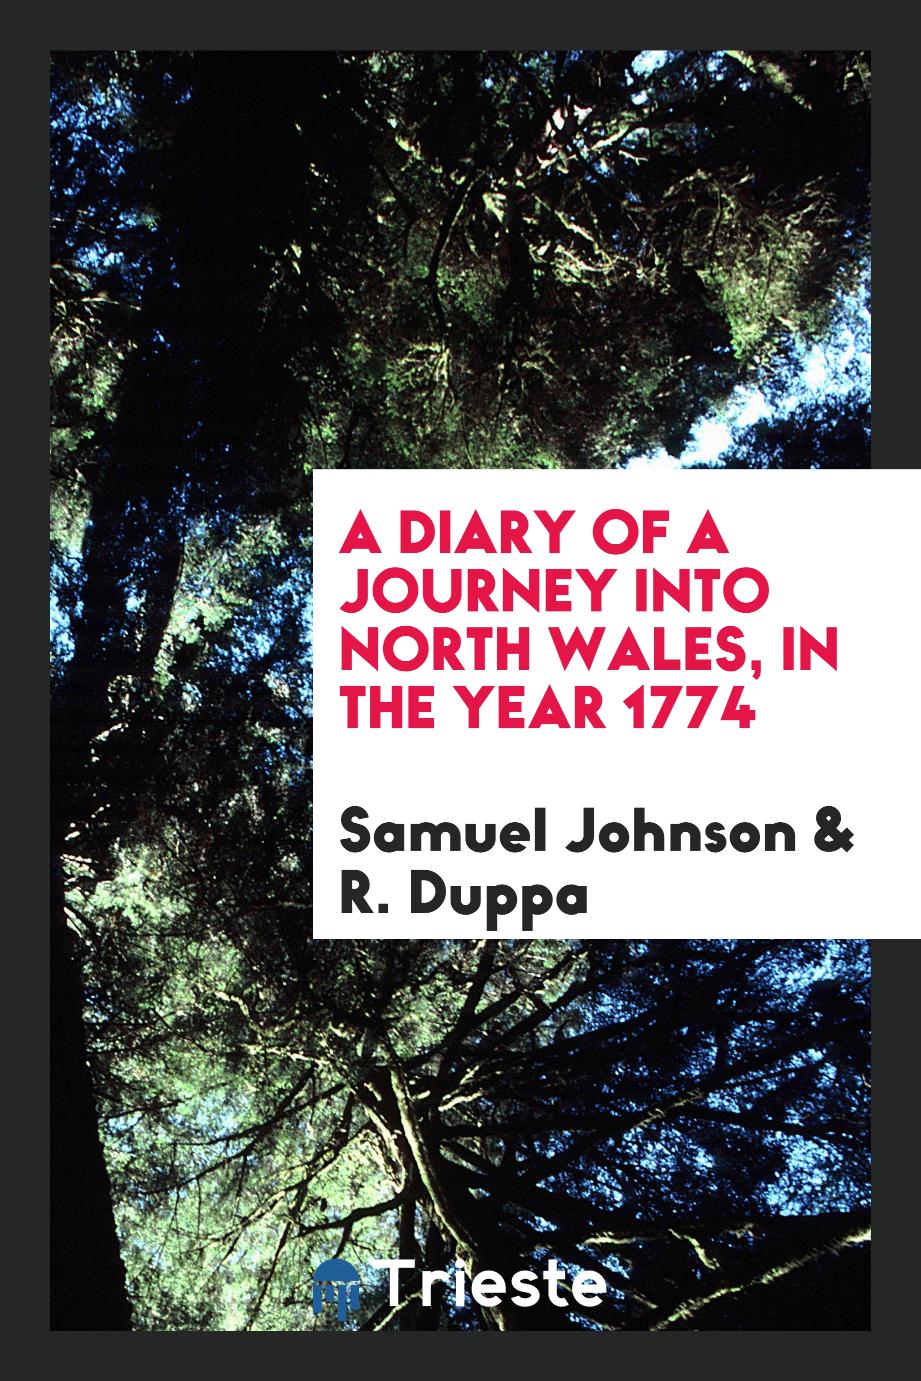 A diary of a journey into North Wales, in the year 1774